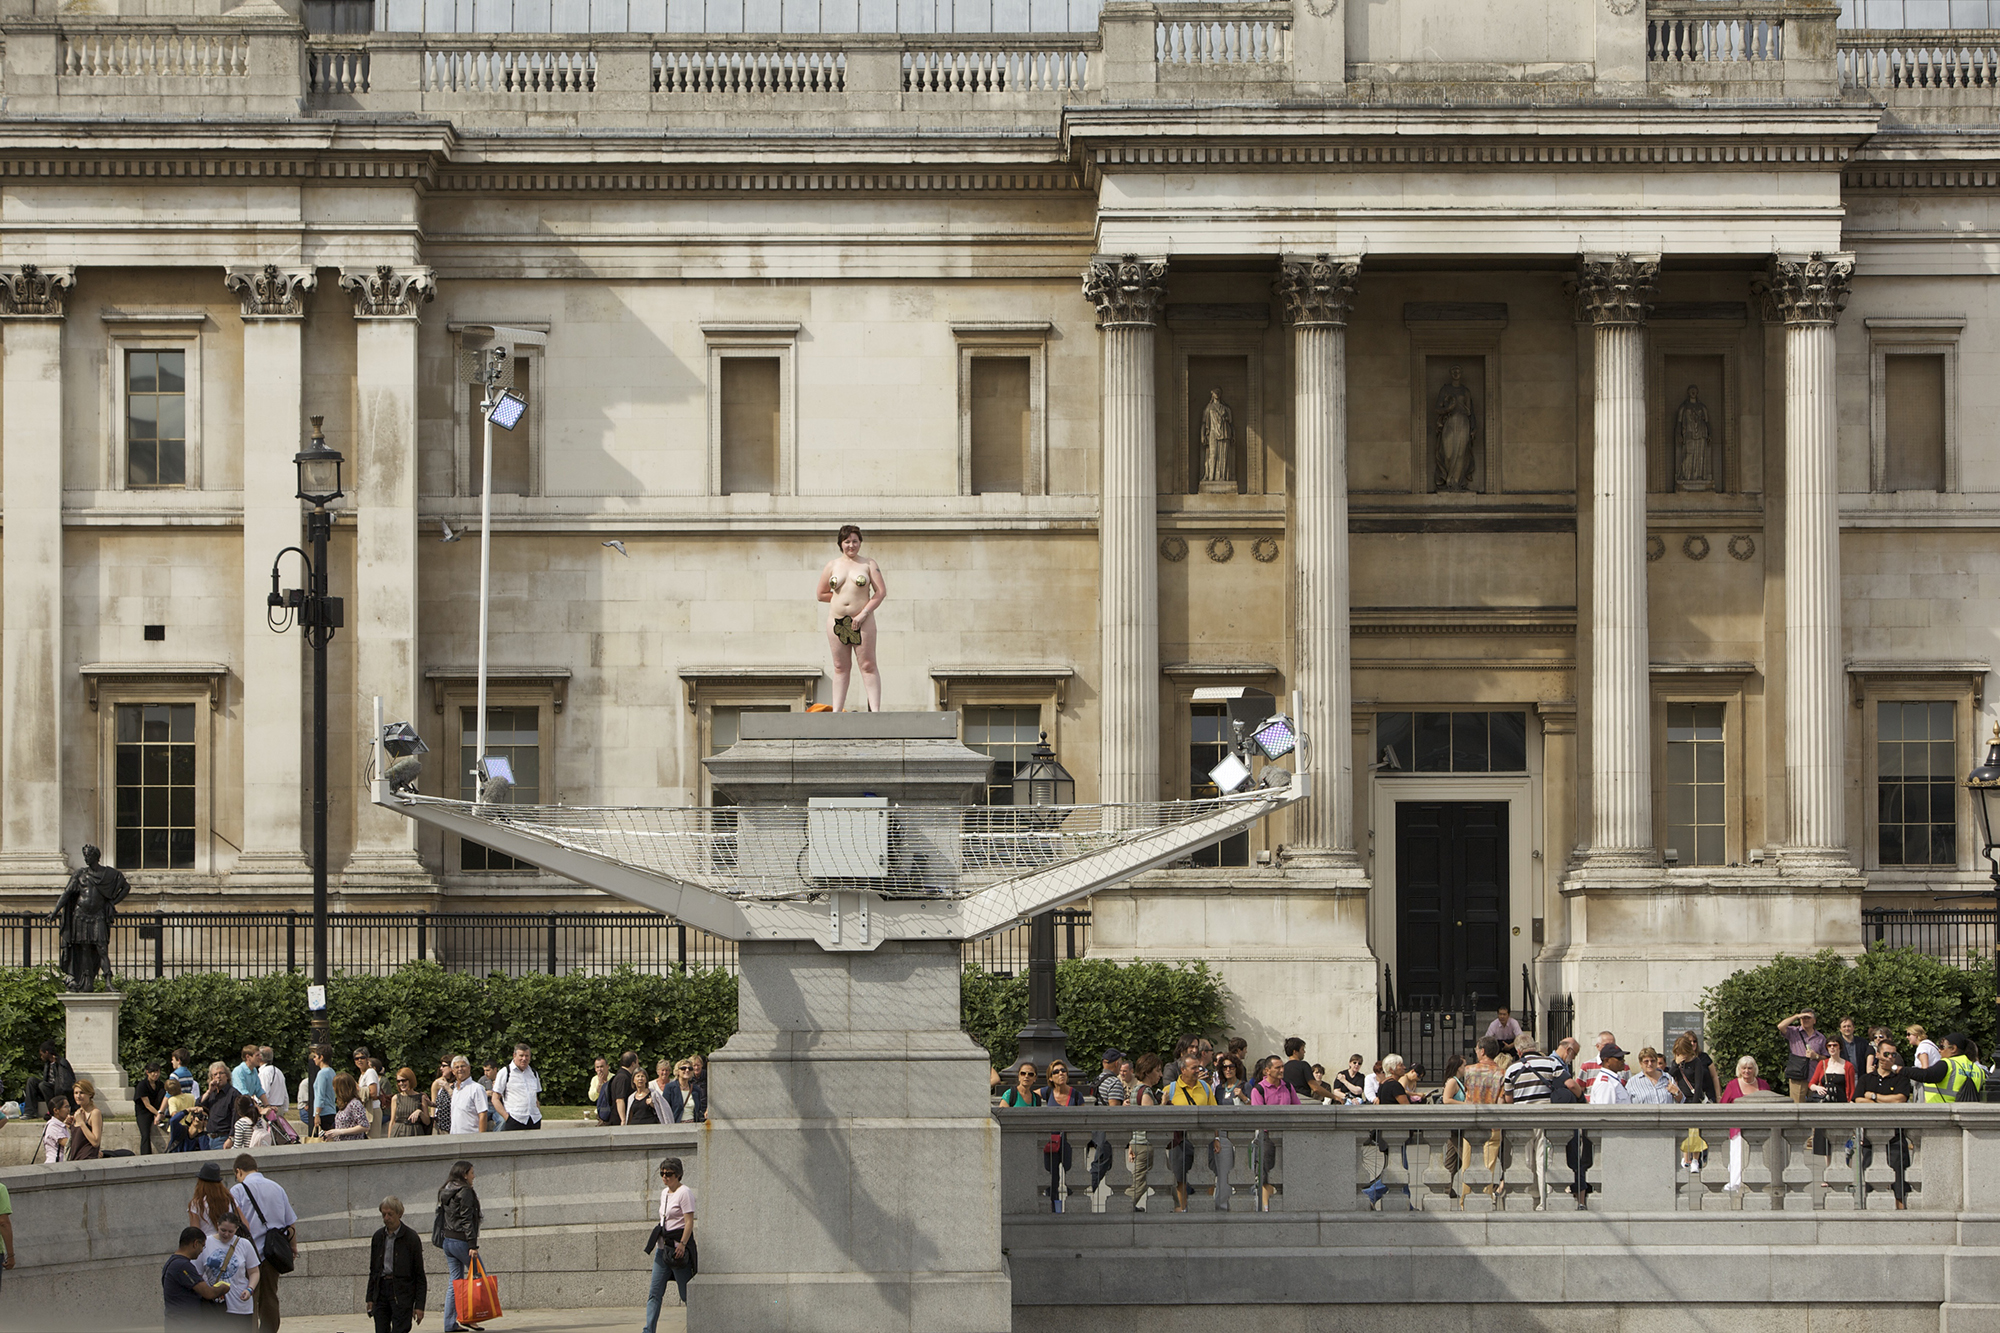 Naked woman standing atop the Fourth Plinth